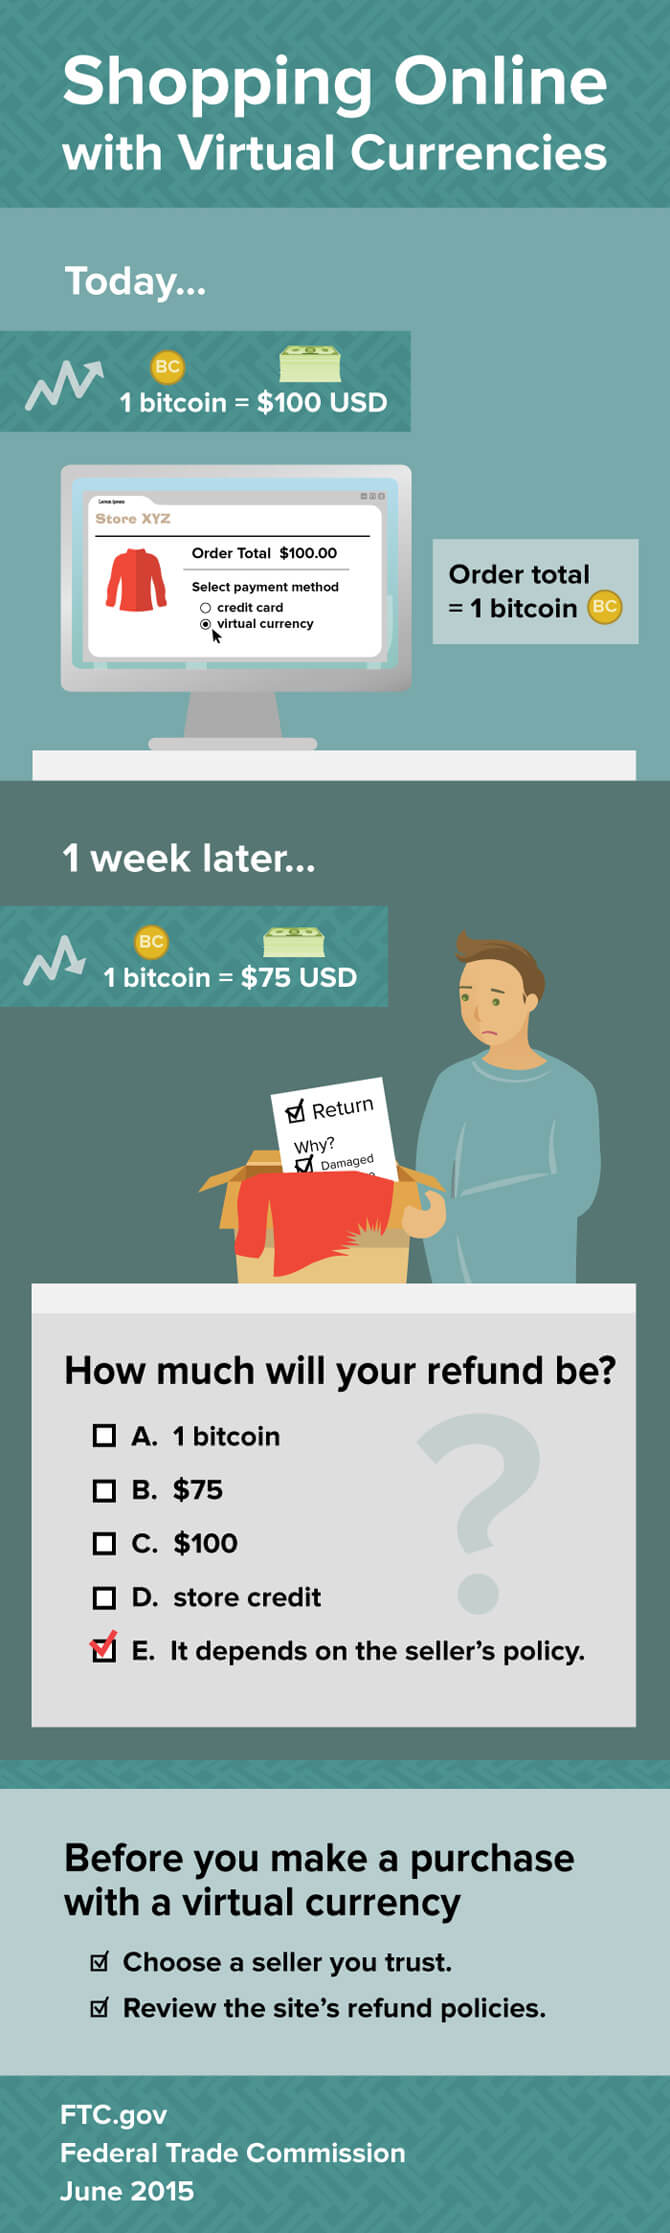 Shopping Online with Virtual Currencies [Infographic]